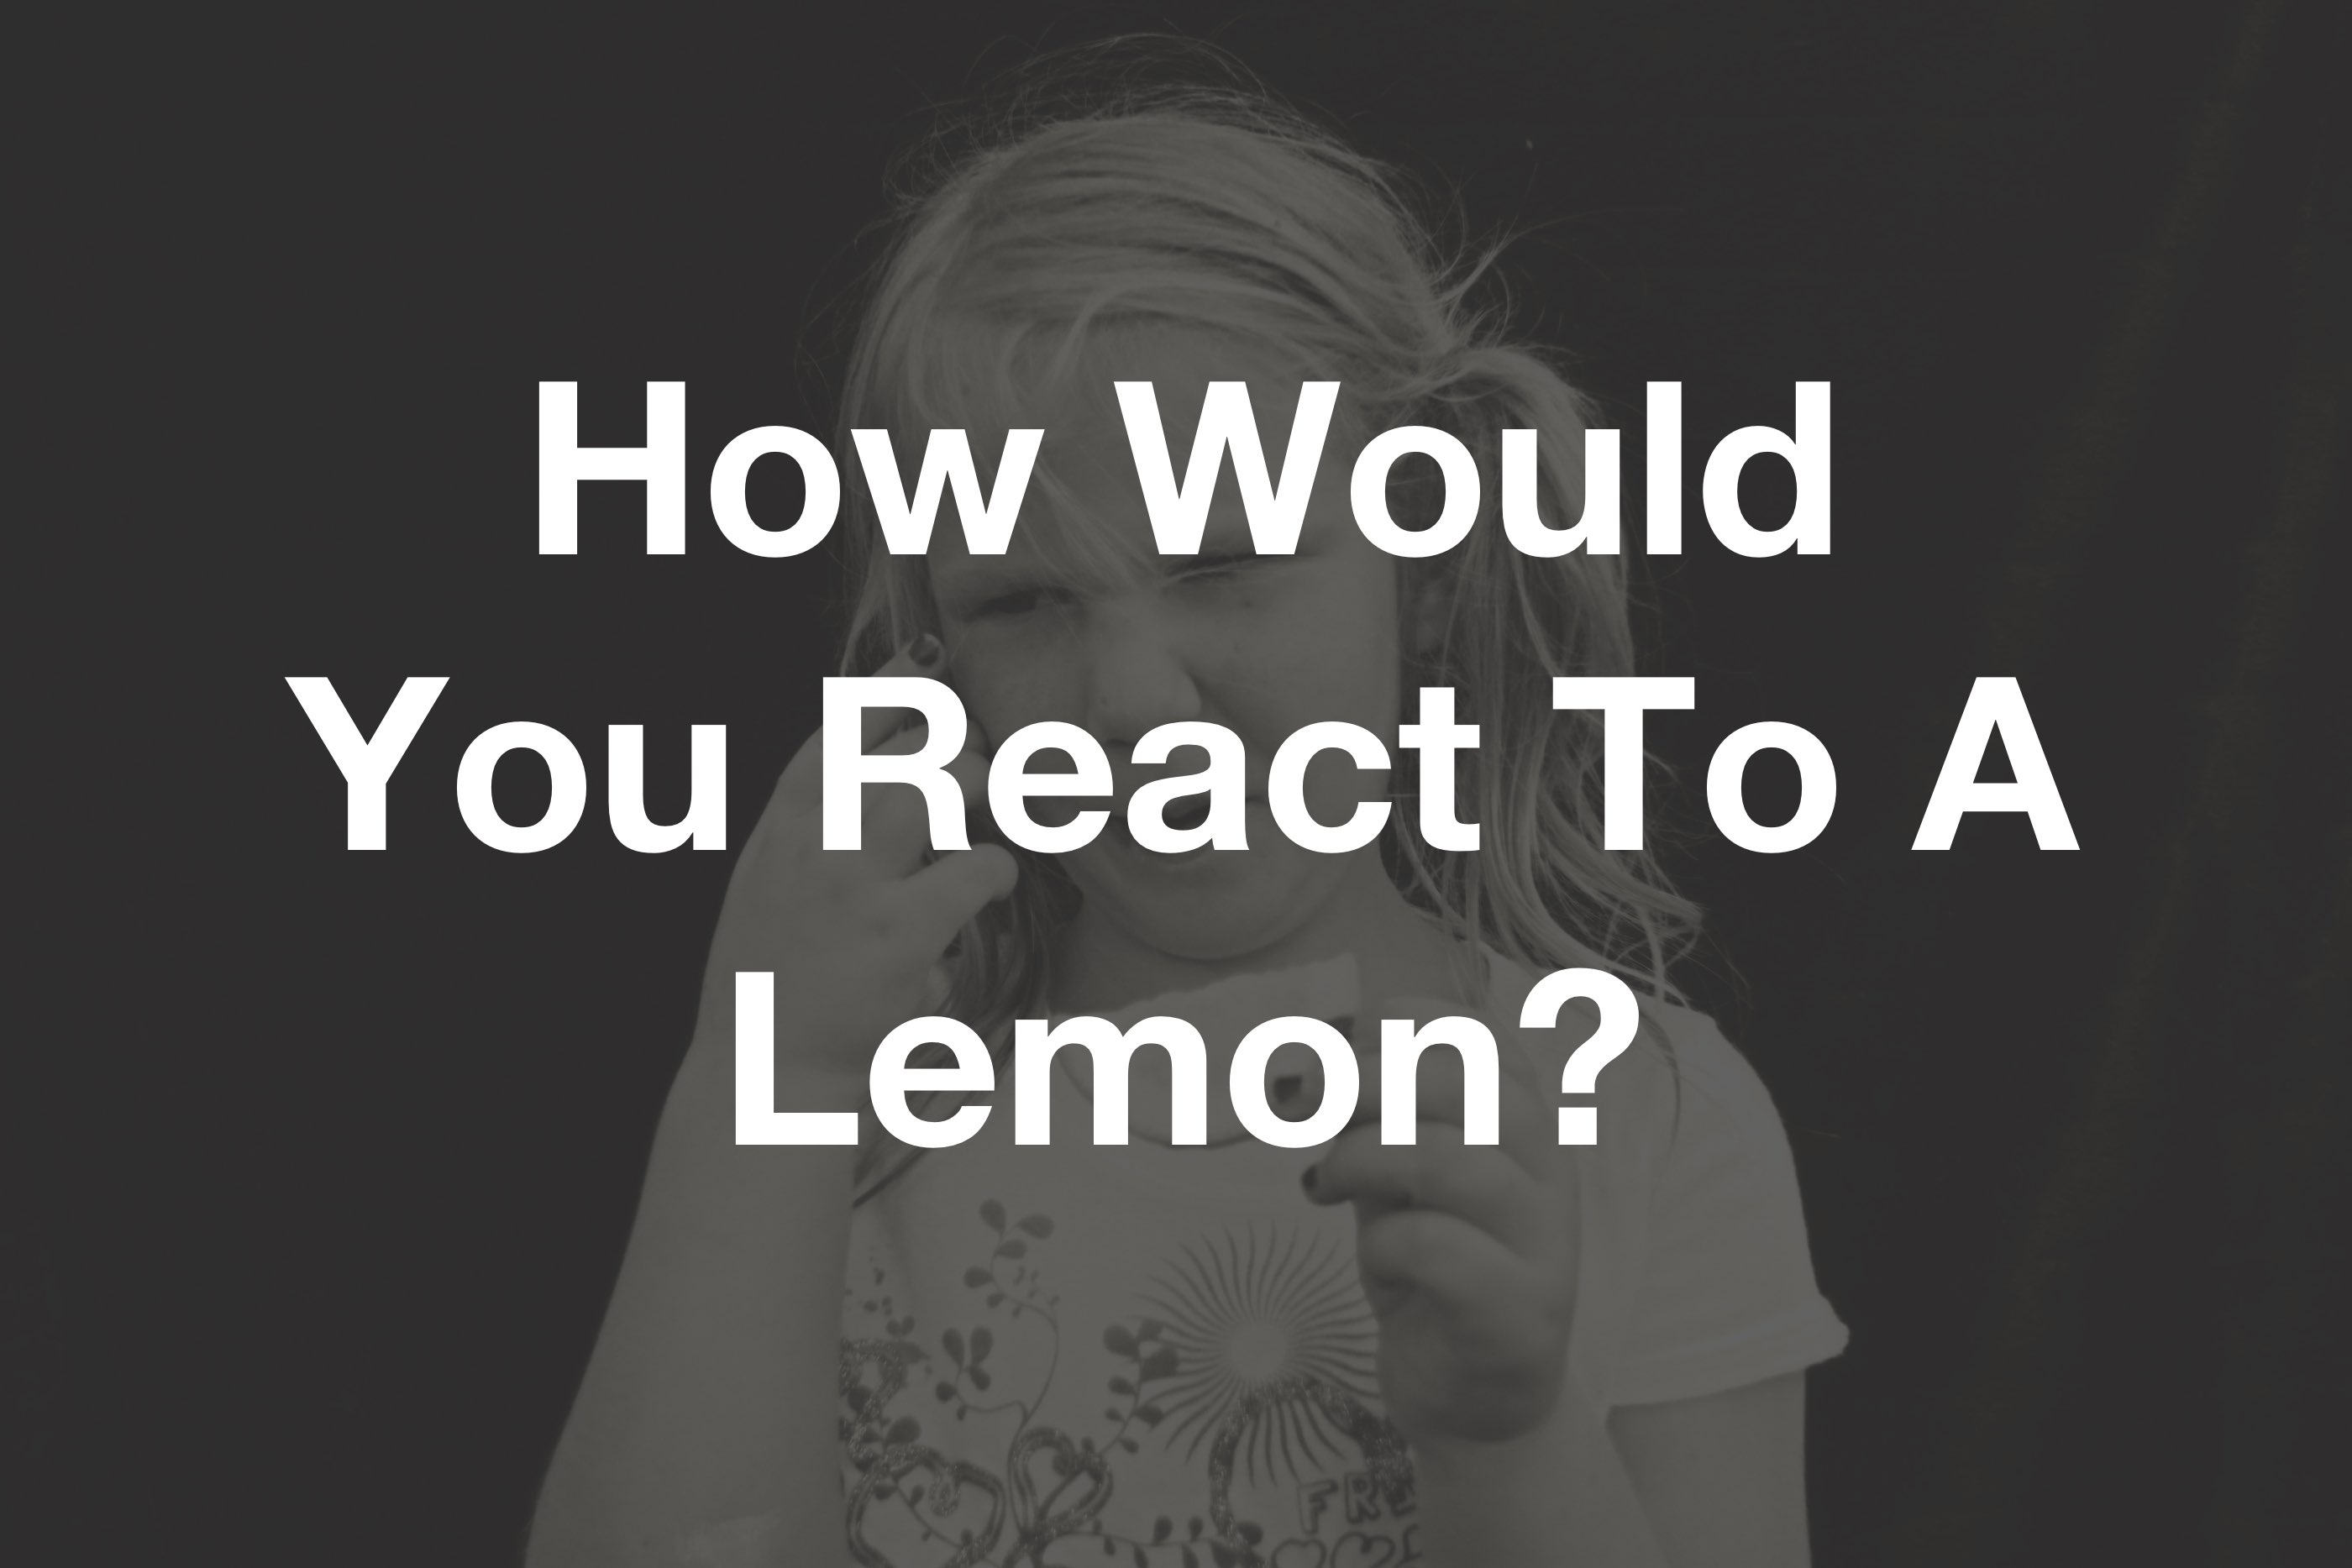 How To Decide If You’re An Introvert Or Extrovert With A Lemon